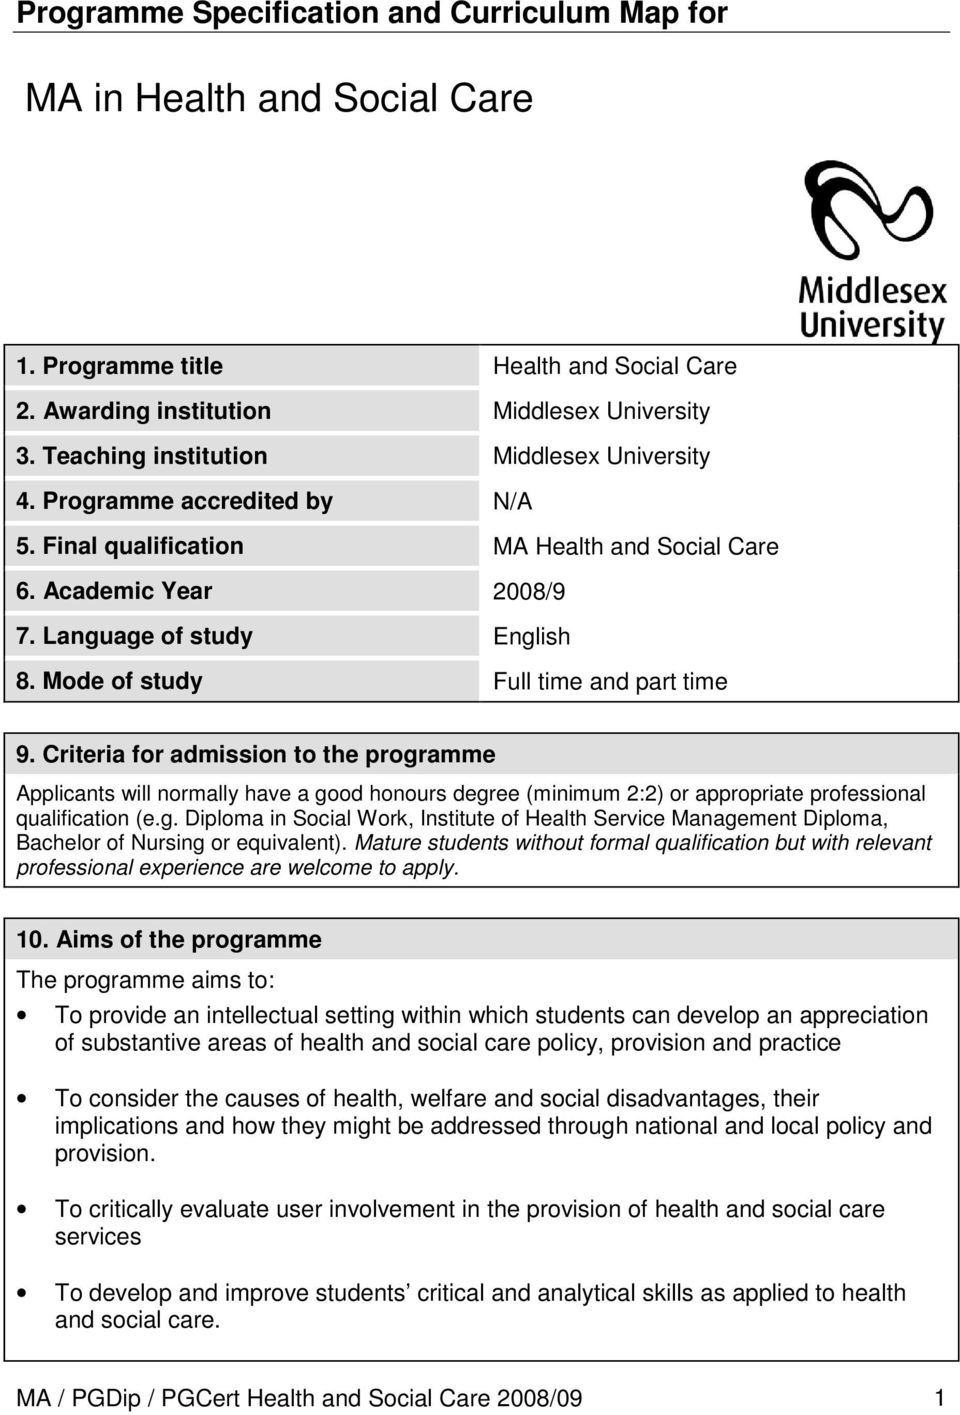 Mode of study Full time and part time 9. Criteria for admission to the programme Applicants will normally have a good honours degree (minimum 2:2) or appropriate professional qualification (e.g. Diploma in Social Work, Institute of Health Service Management Diploma, Bachelor of Nursing or equivalent).